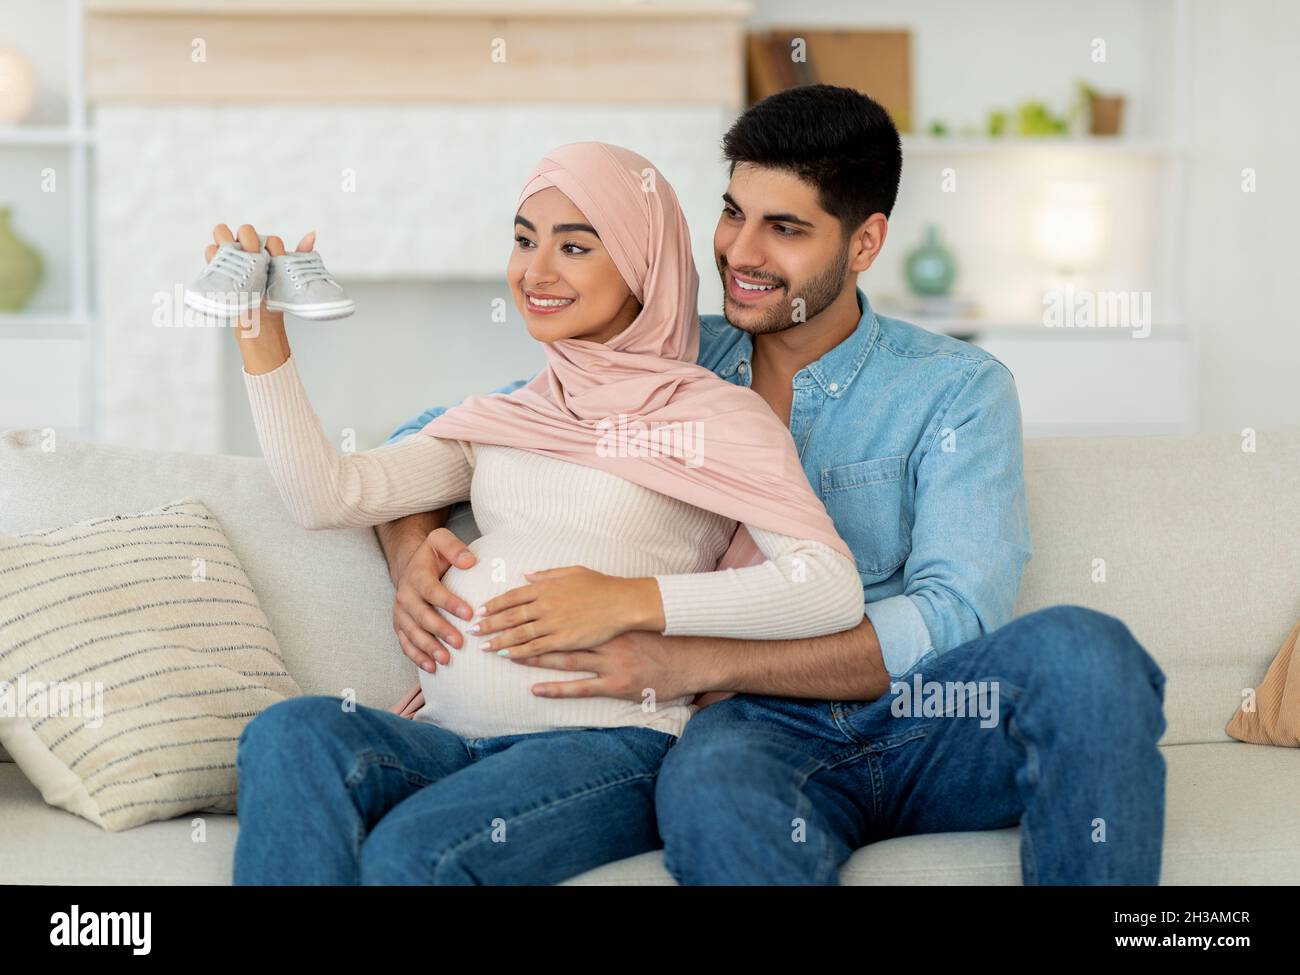 Loving arab man hugging his pregnant wife with baby booties, sitting together on sofa at home Stock Photo